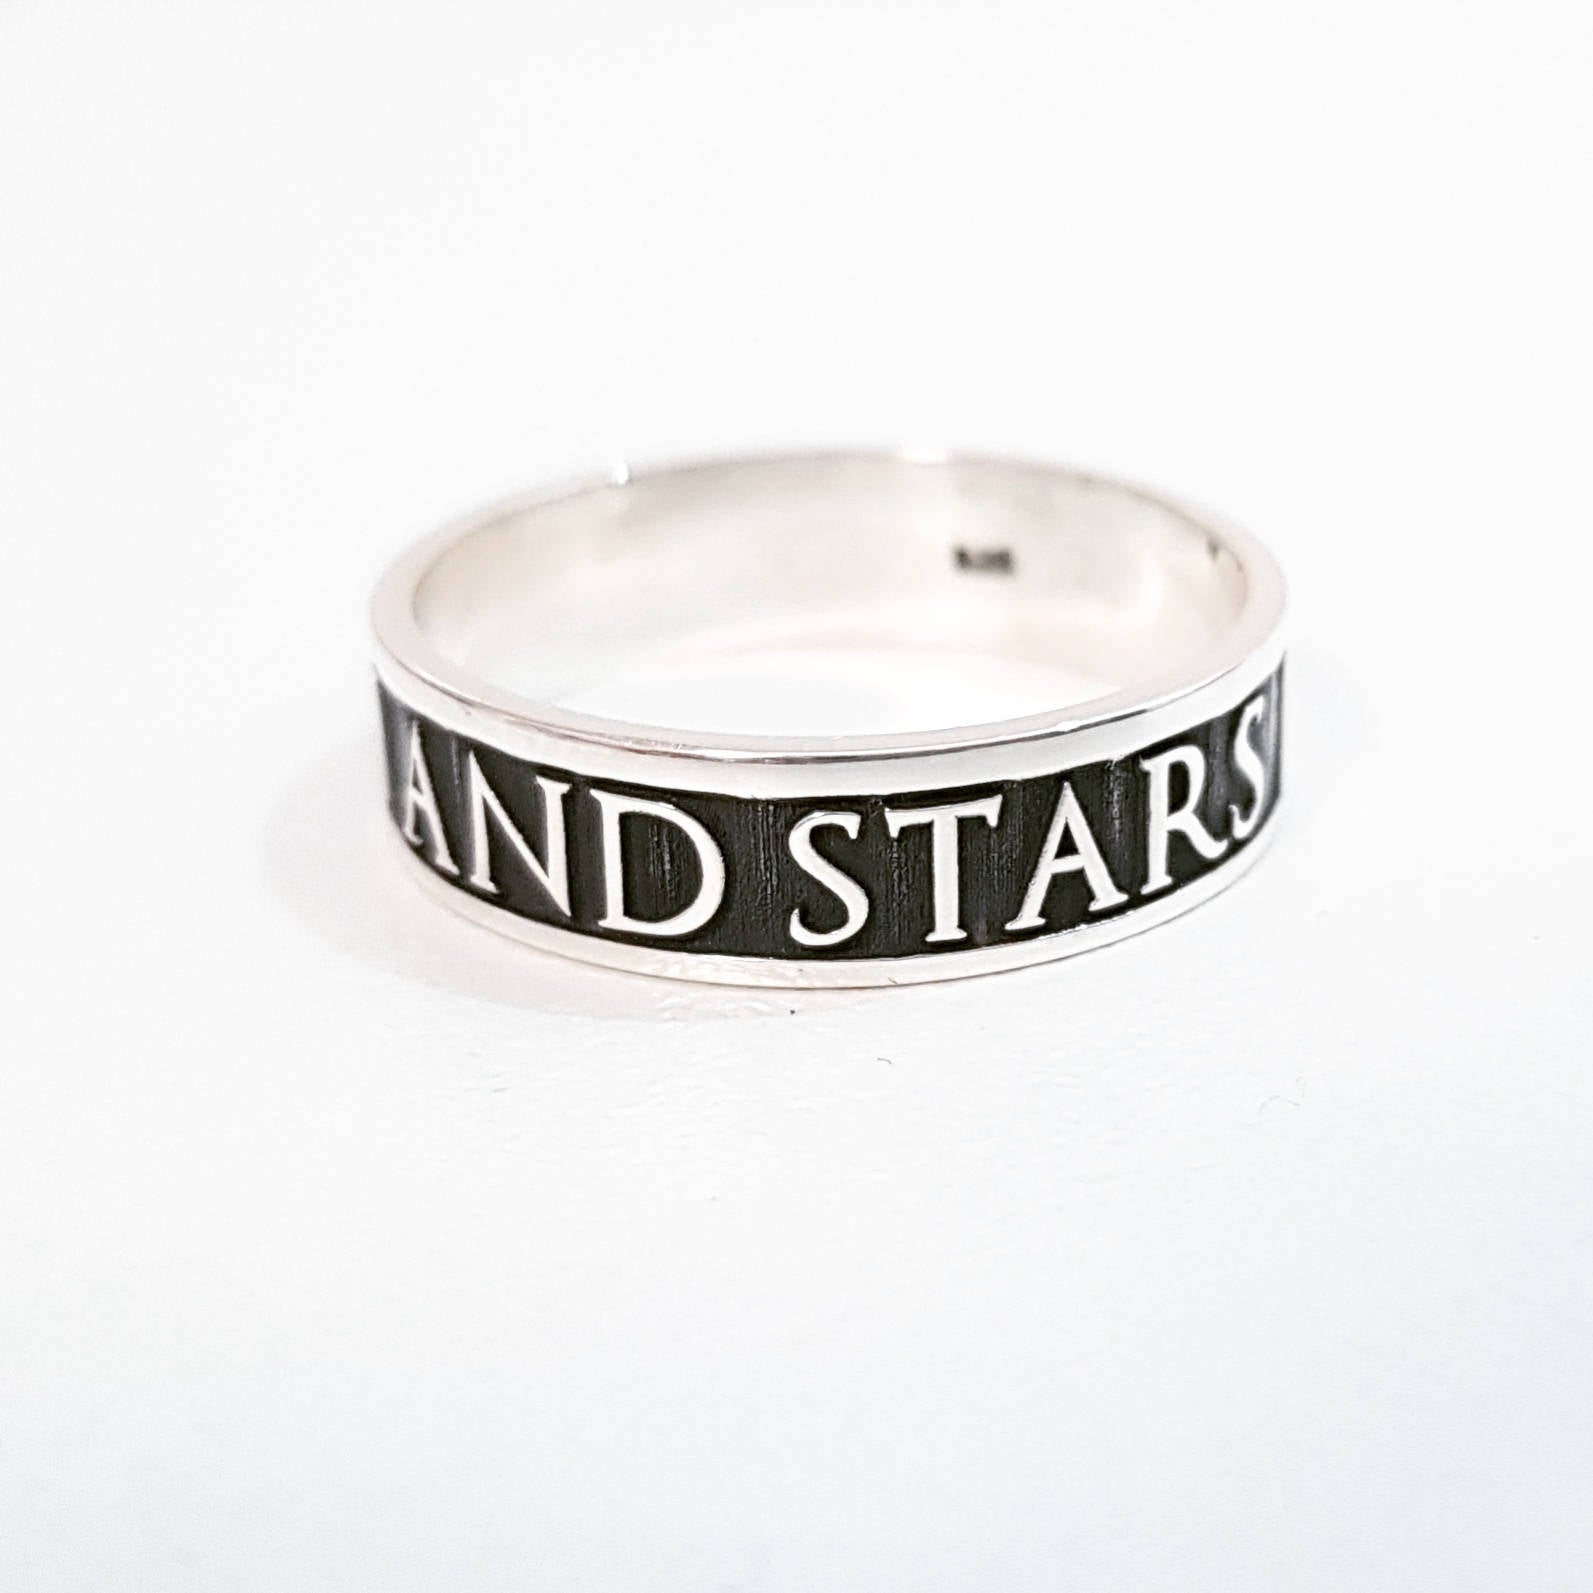 Game of Thrones ring, My Sun Stars, Moon of My Life, birthday gift, gift ideas for her, Personalized Gift, gift for women, Christmas gift